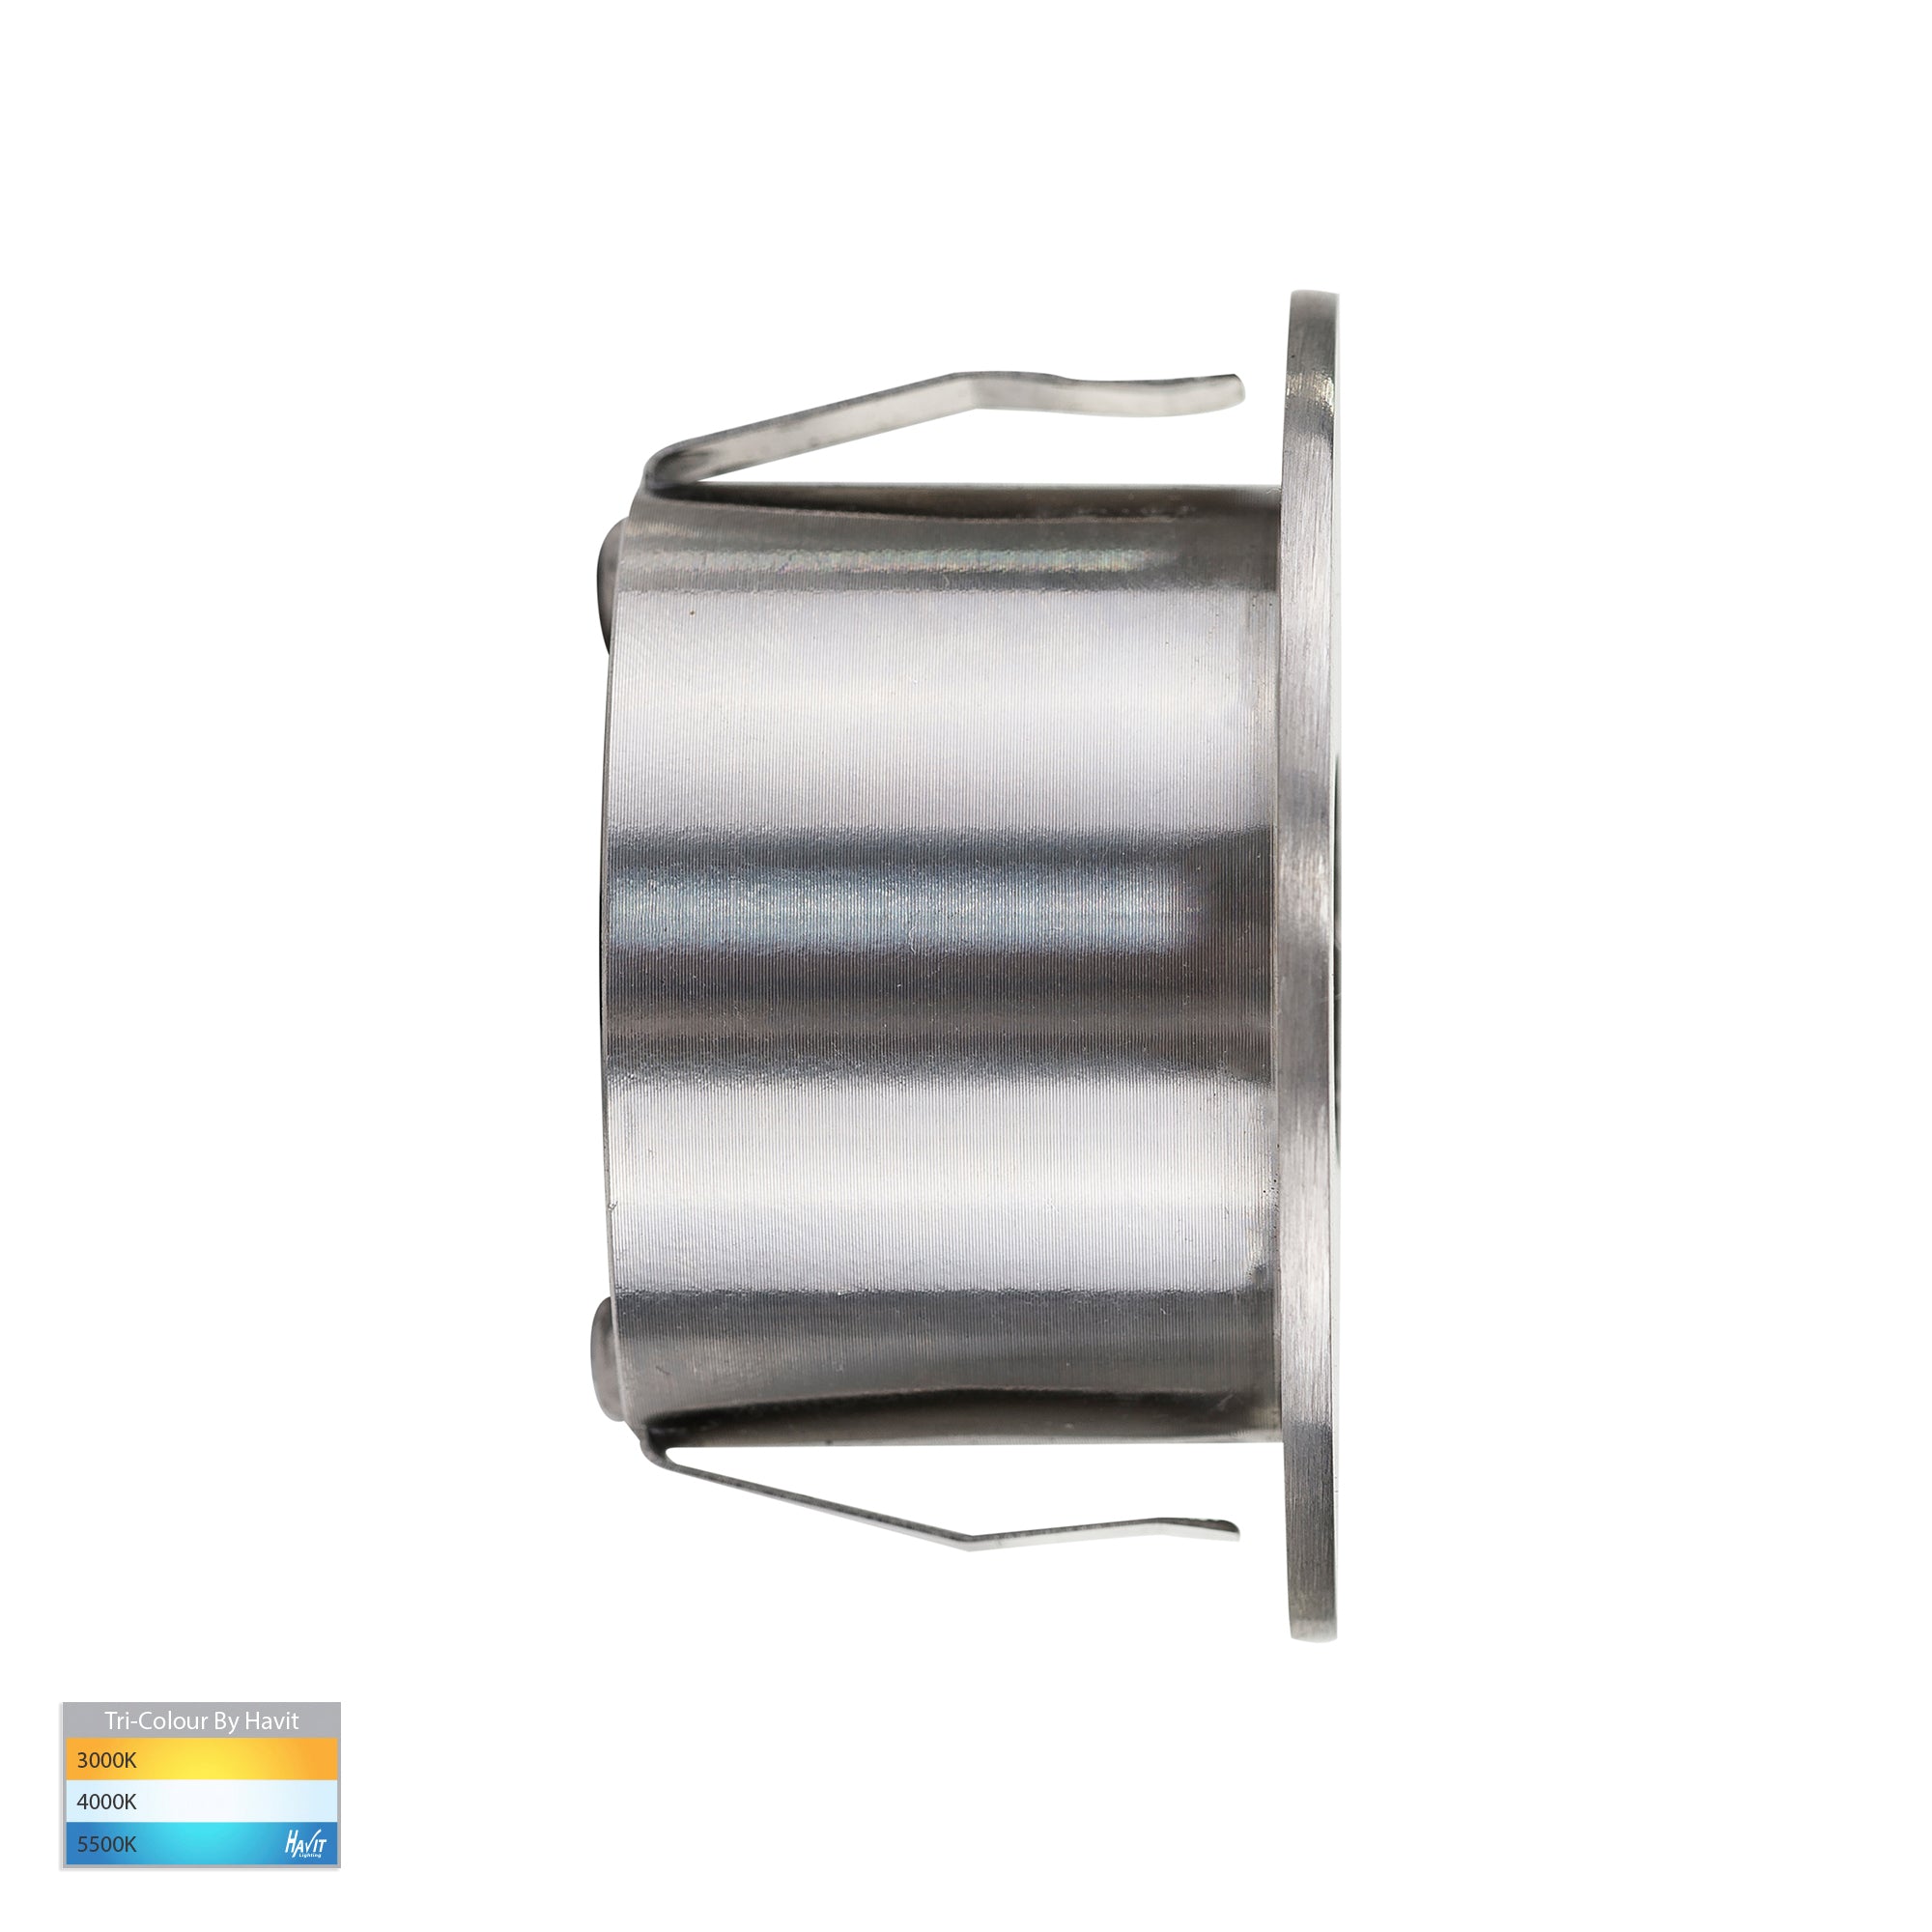 HV3206T-SS316-12V - Mini Reces 316 Stainless Steel Round TRI Colour Recessed LED Step Light